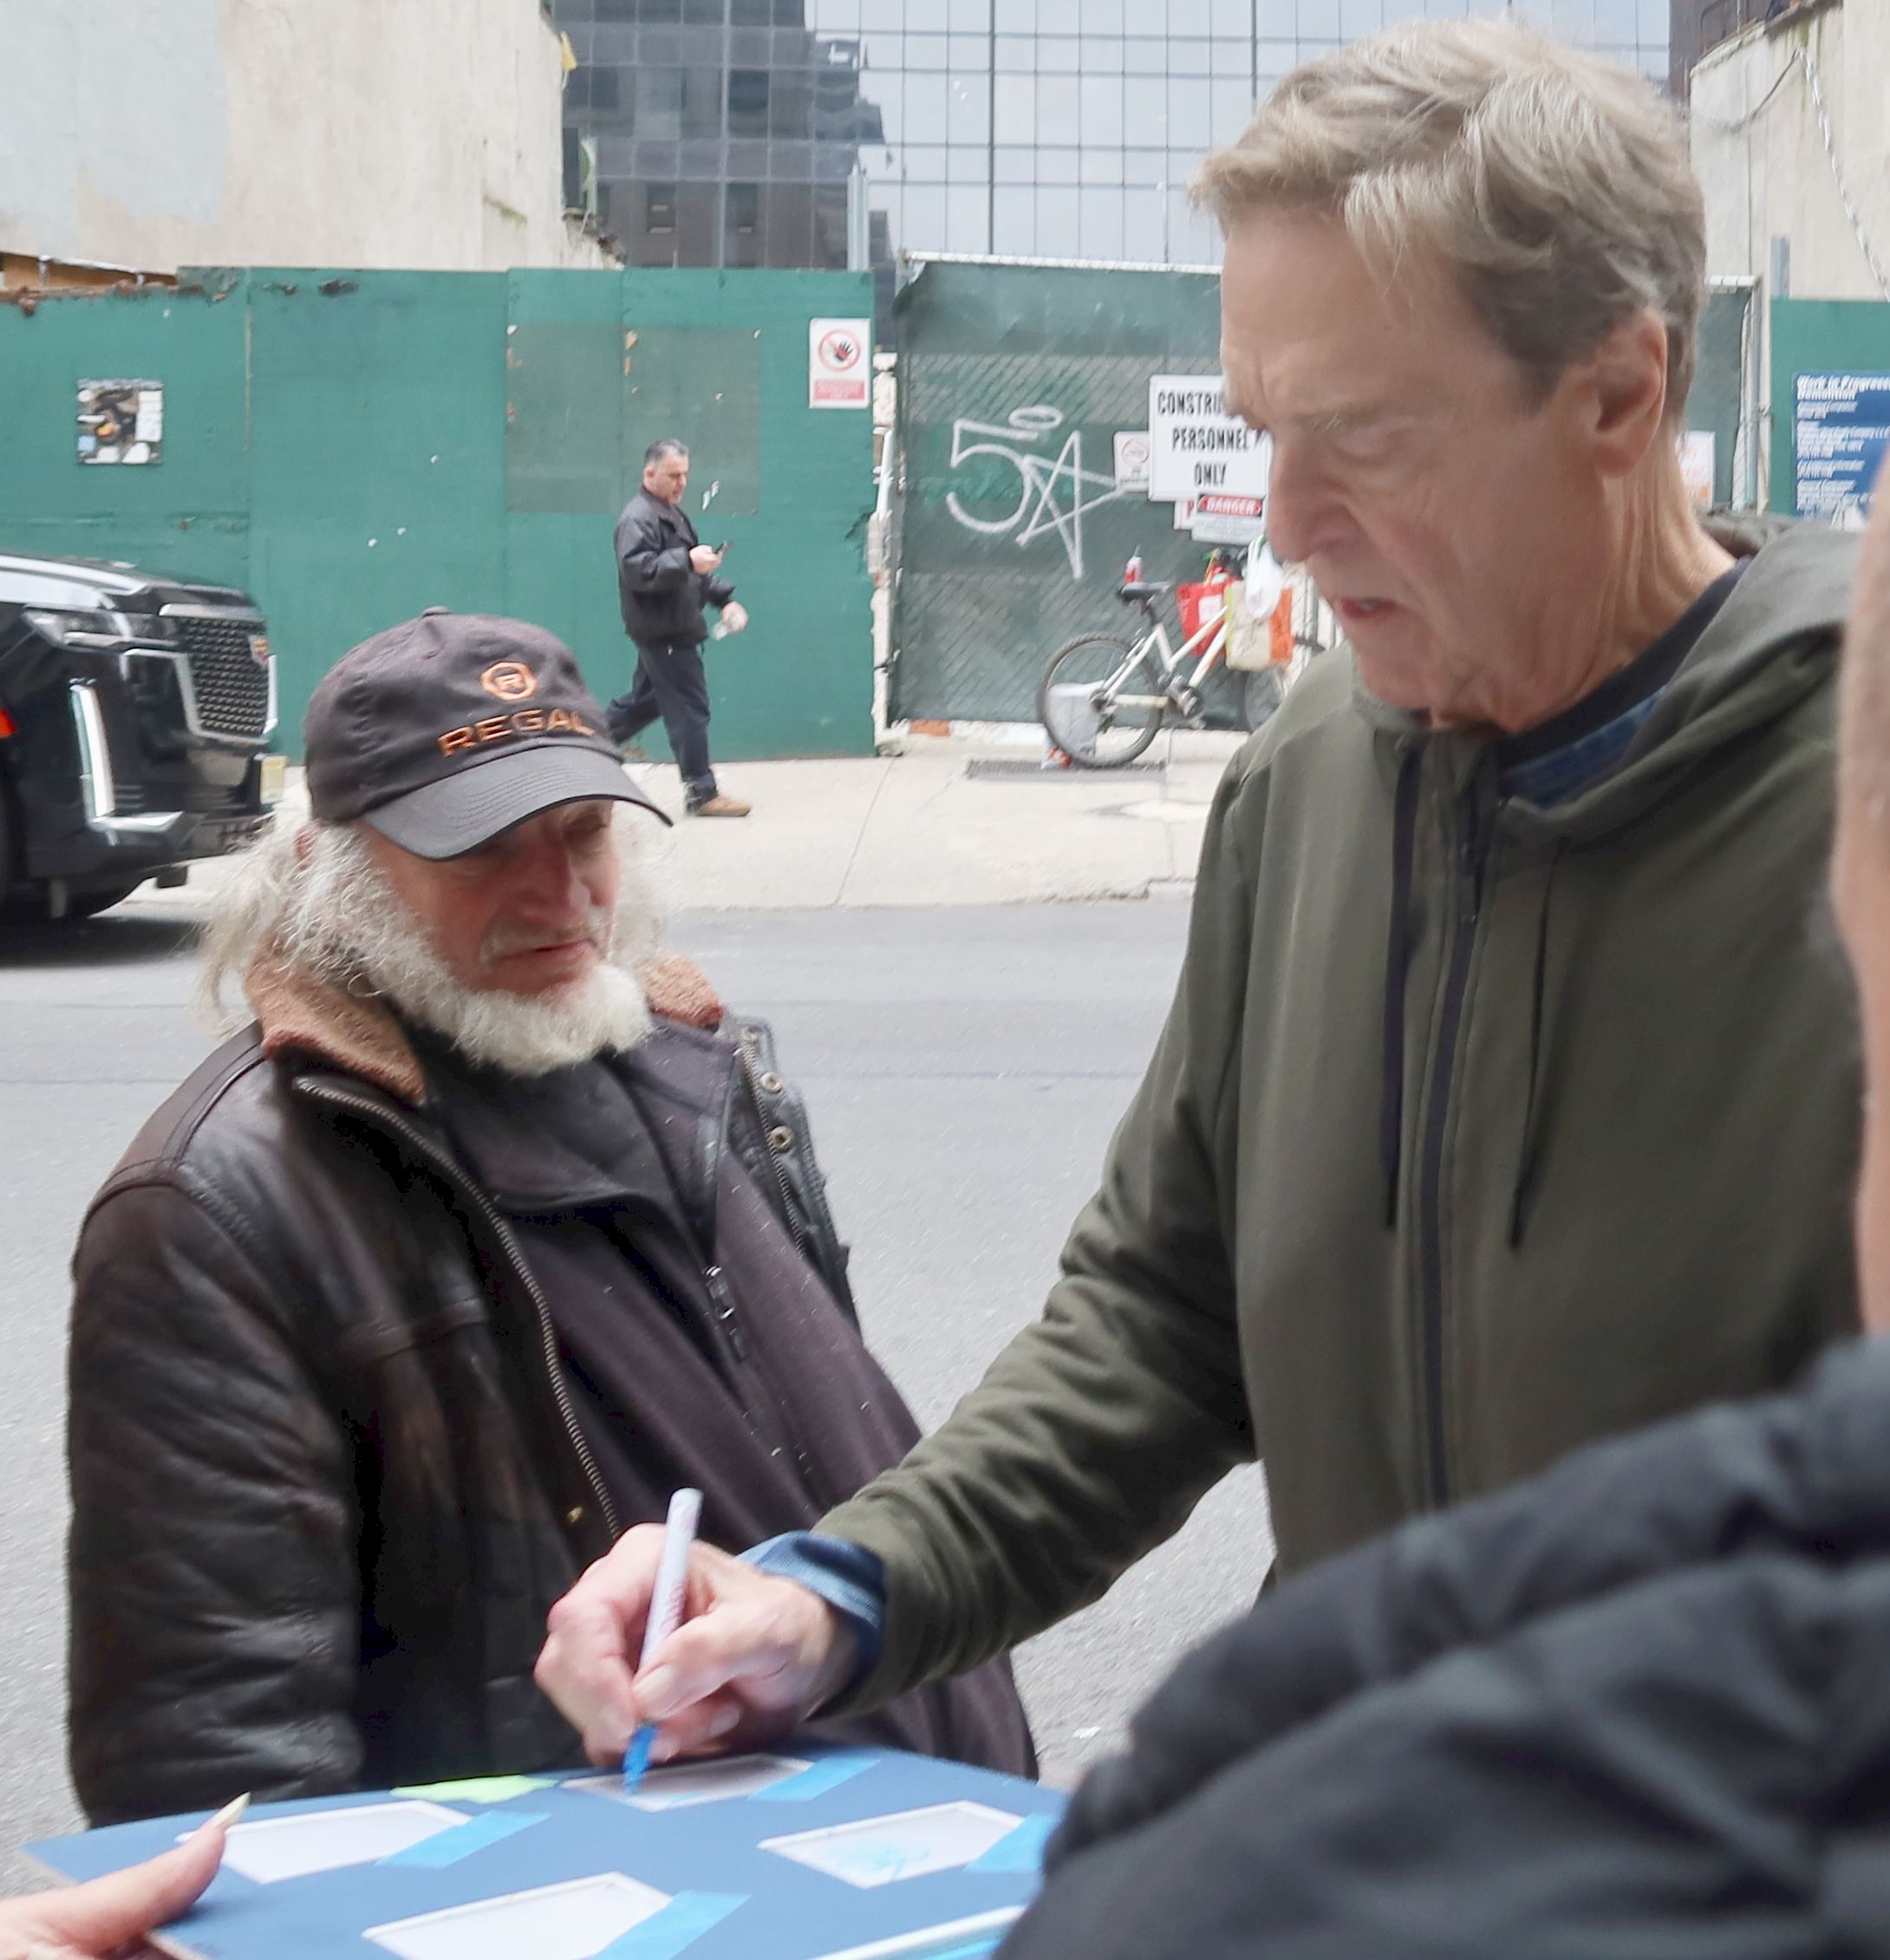 On Wednesday, John was seen signing autographs for fans